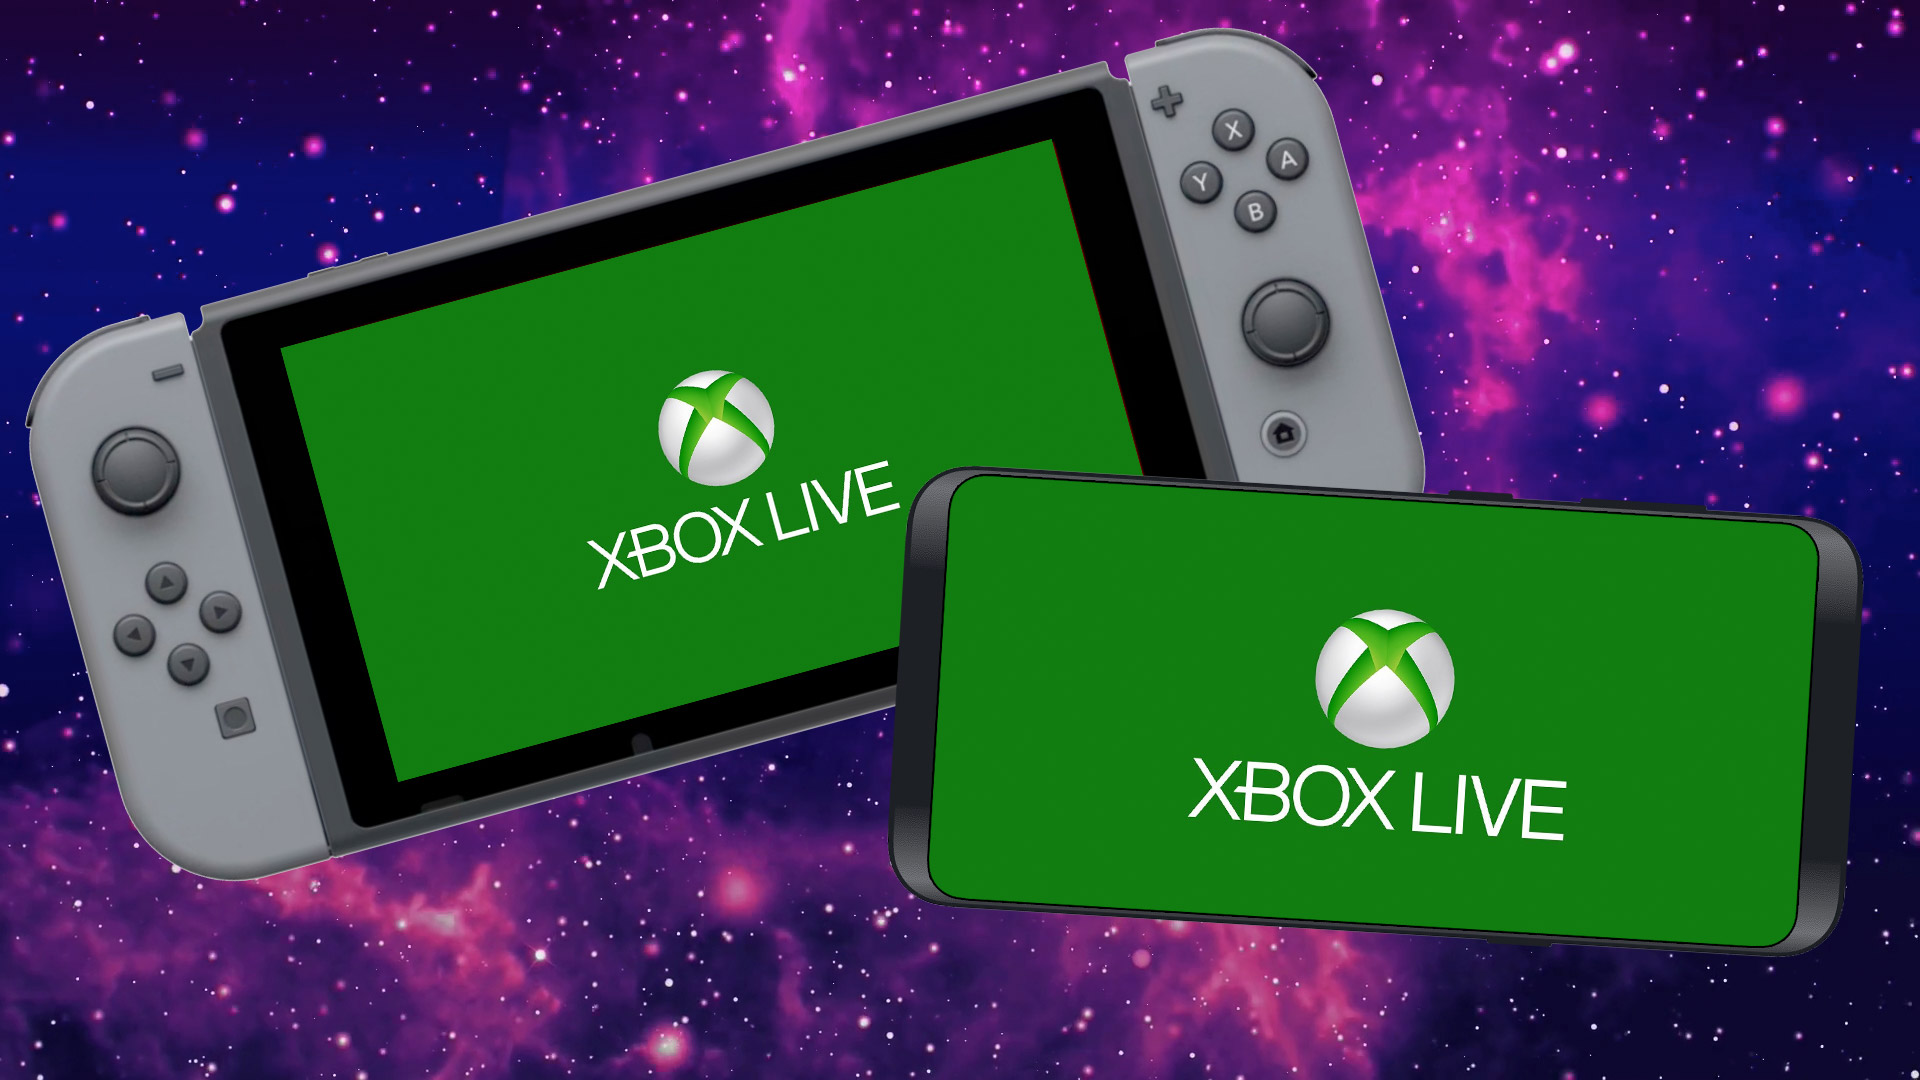 download live a live switch reviews